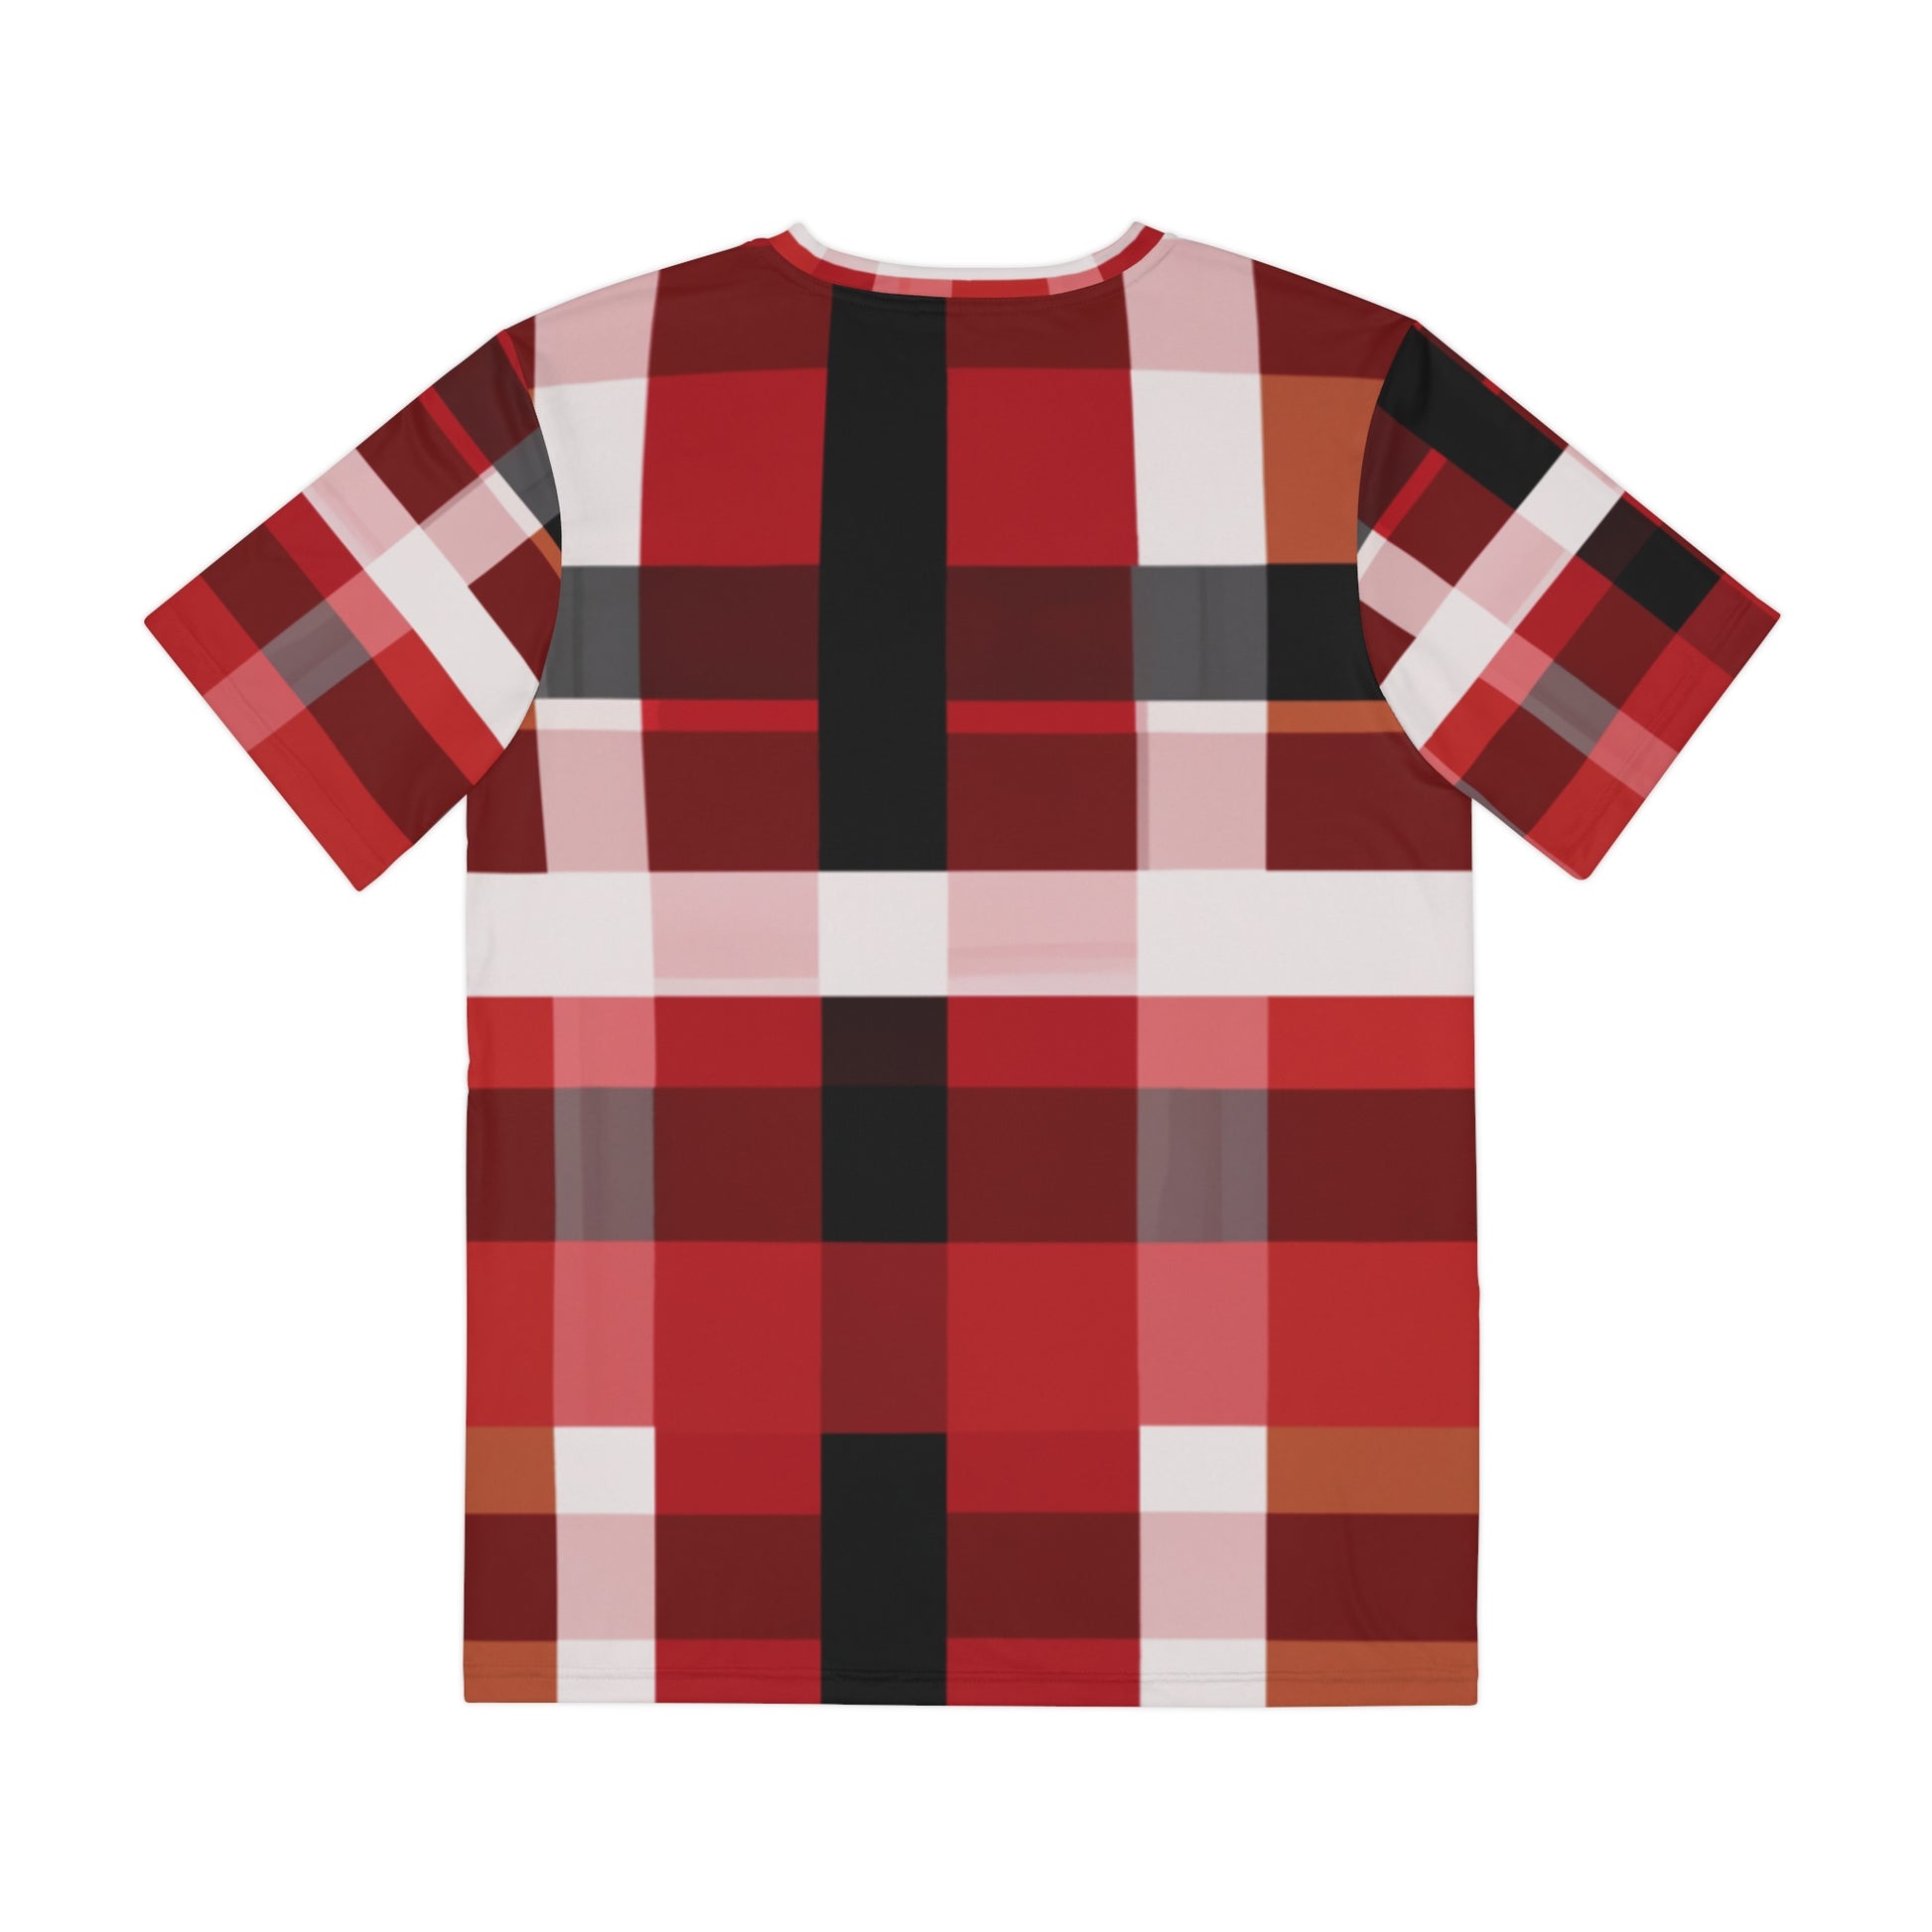 Back view of the Edinburgh Ember Radiance Crewneck Pullover Short-Sleeved Shirt red white black yellow plaid pattern